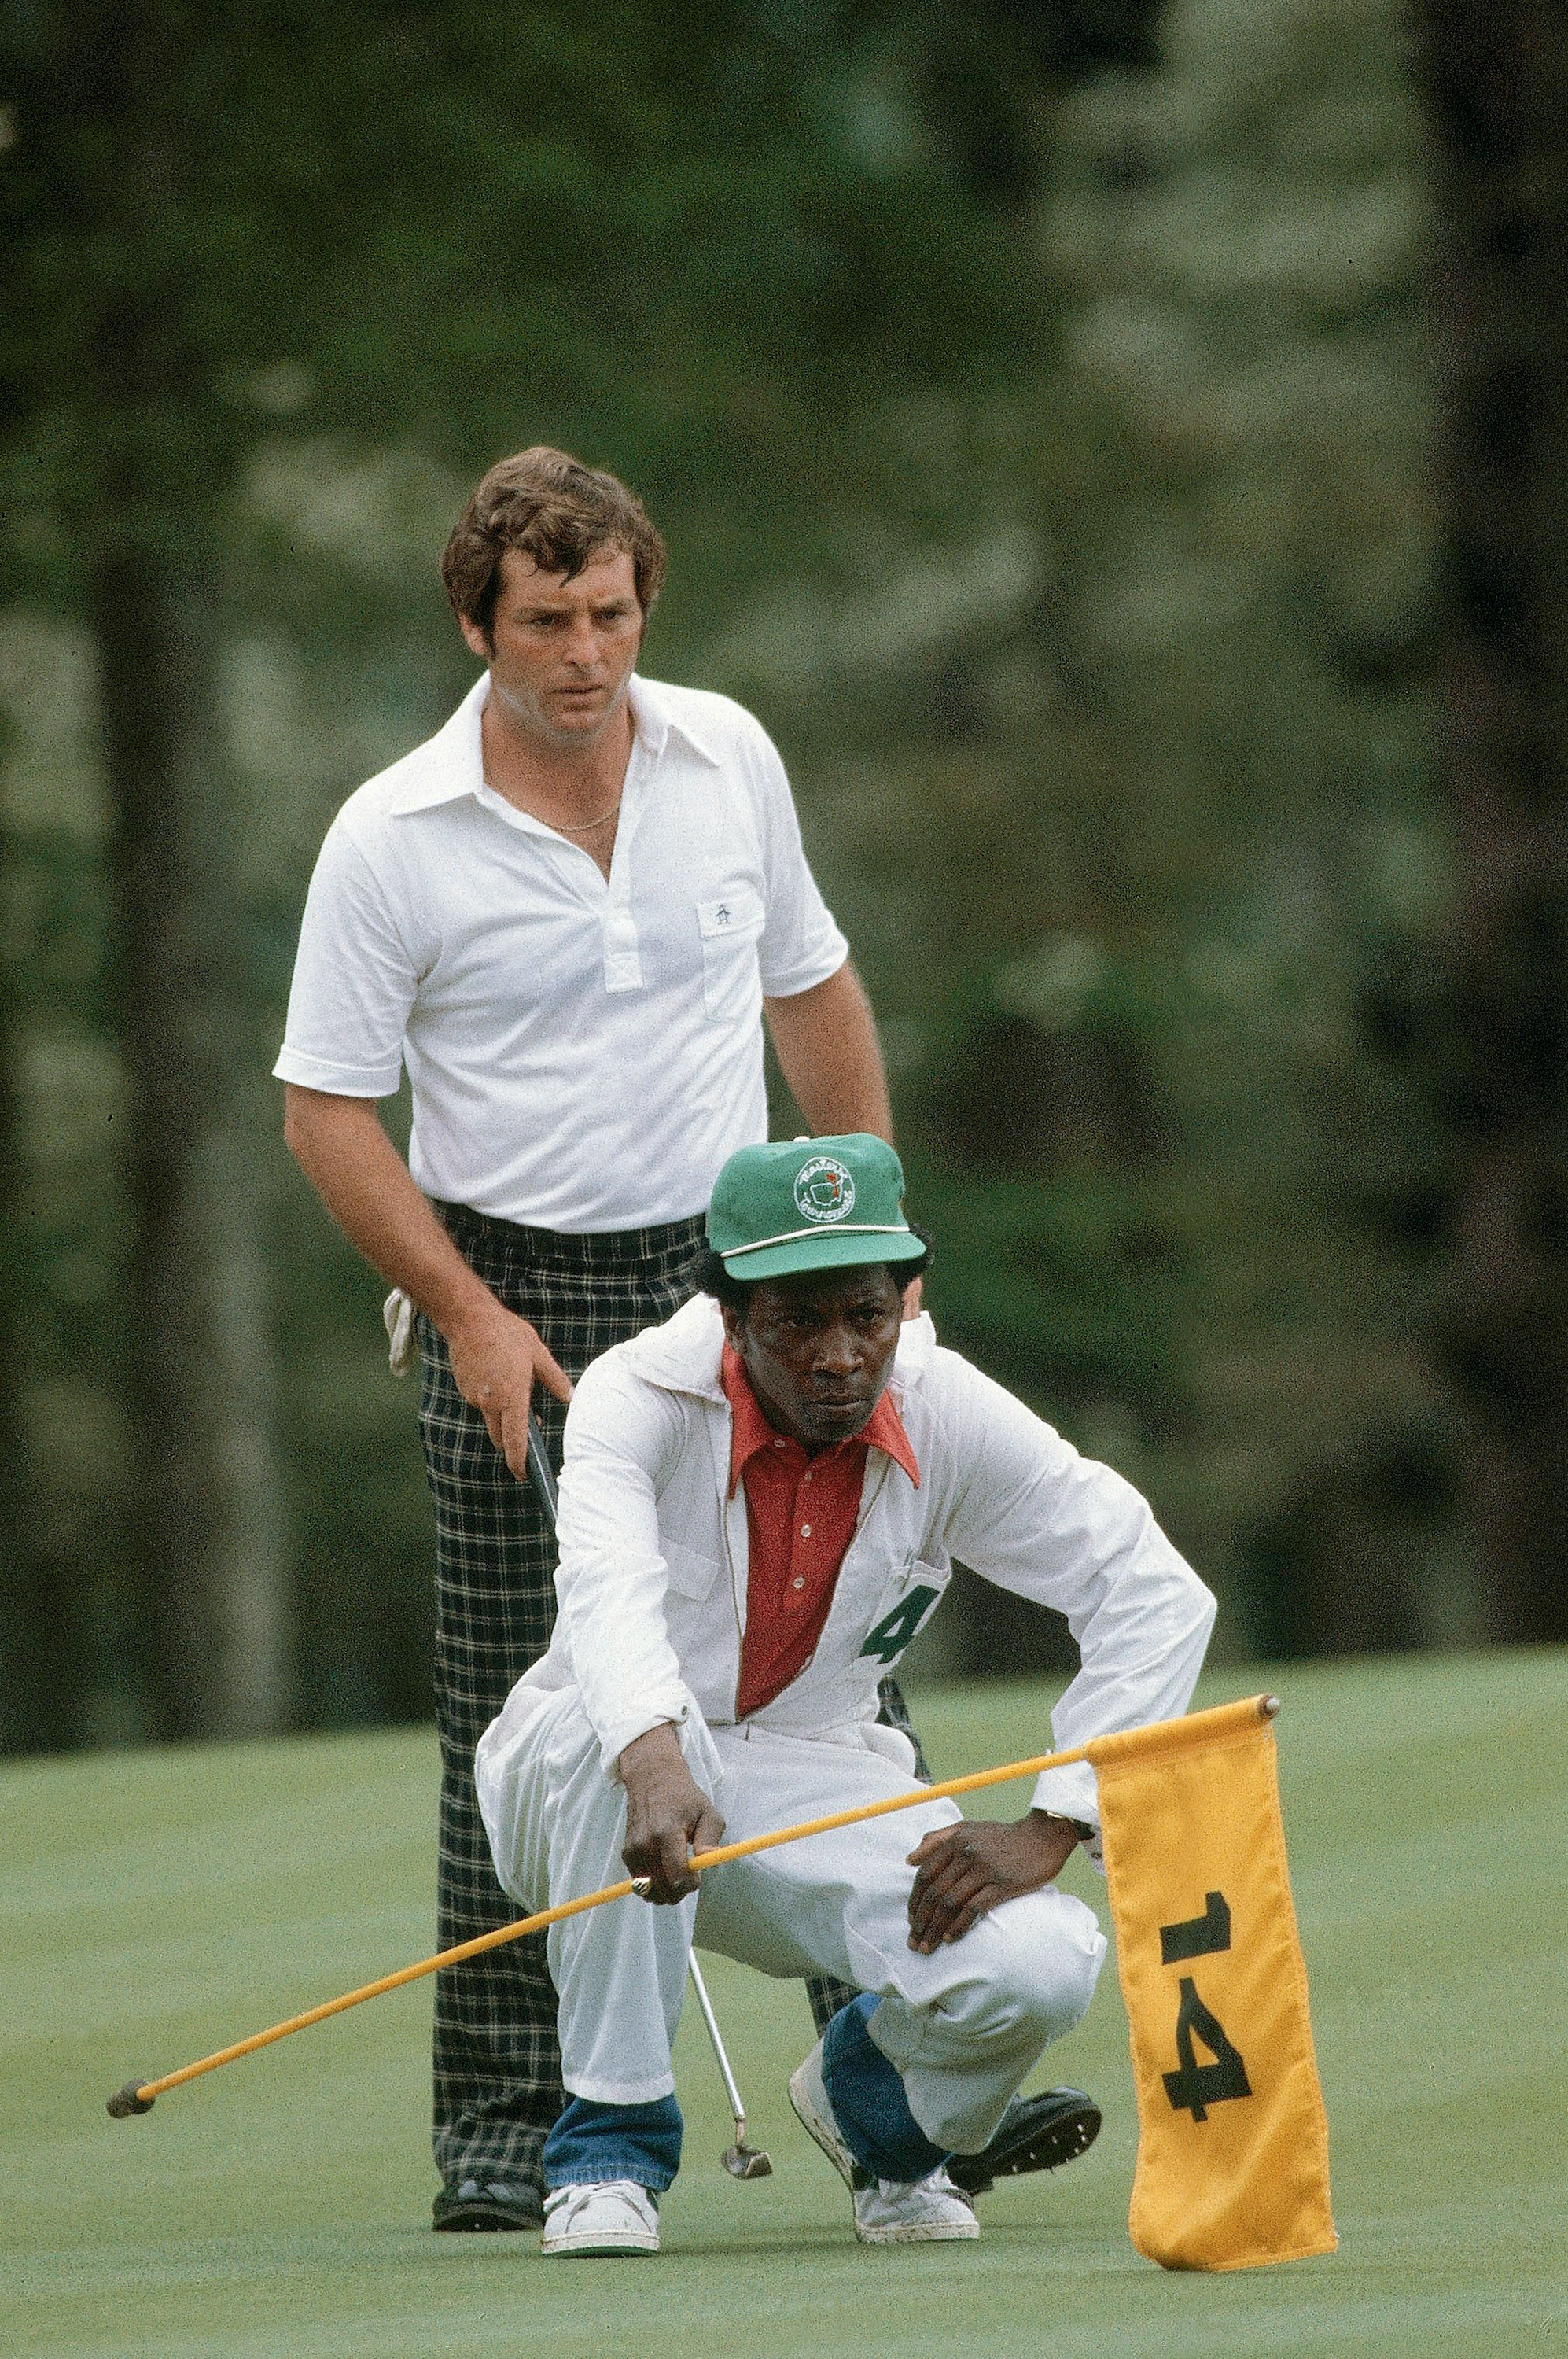 A caddy crouches on the ground with a golfer behind him